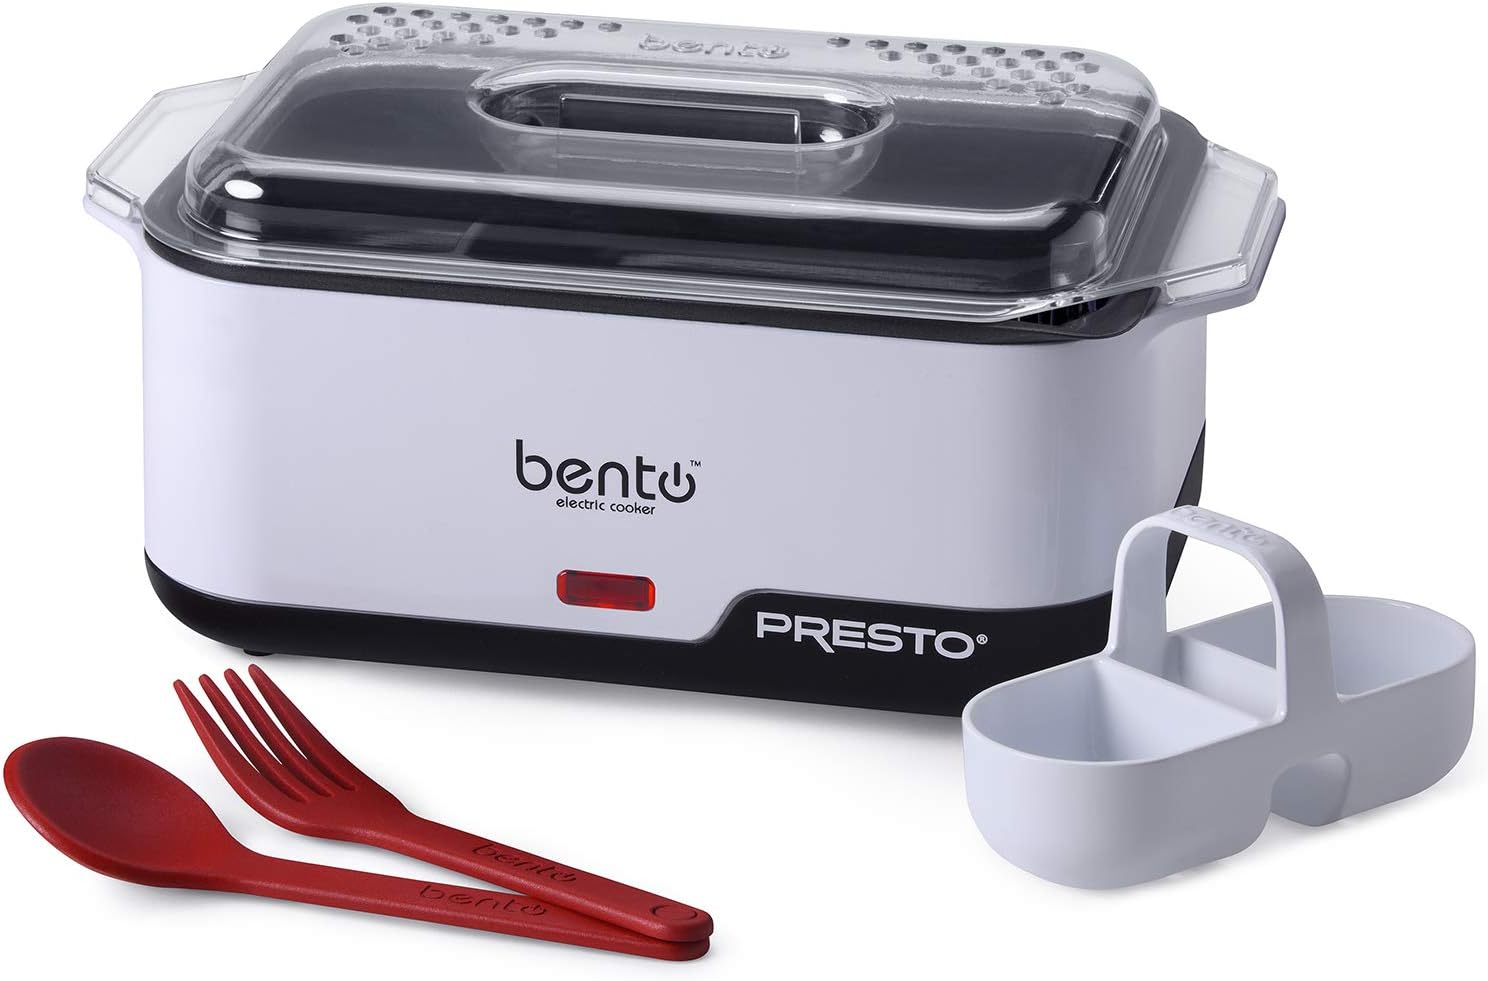 Presto 04634 Bento Electric Cooker - Compact Dual Compartment Cooker for Ramen, Eggs, Veggies and More, Perfect for Dorm Rooms, Includes Spoon/Fork